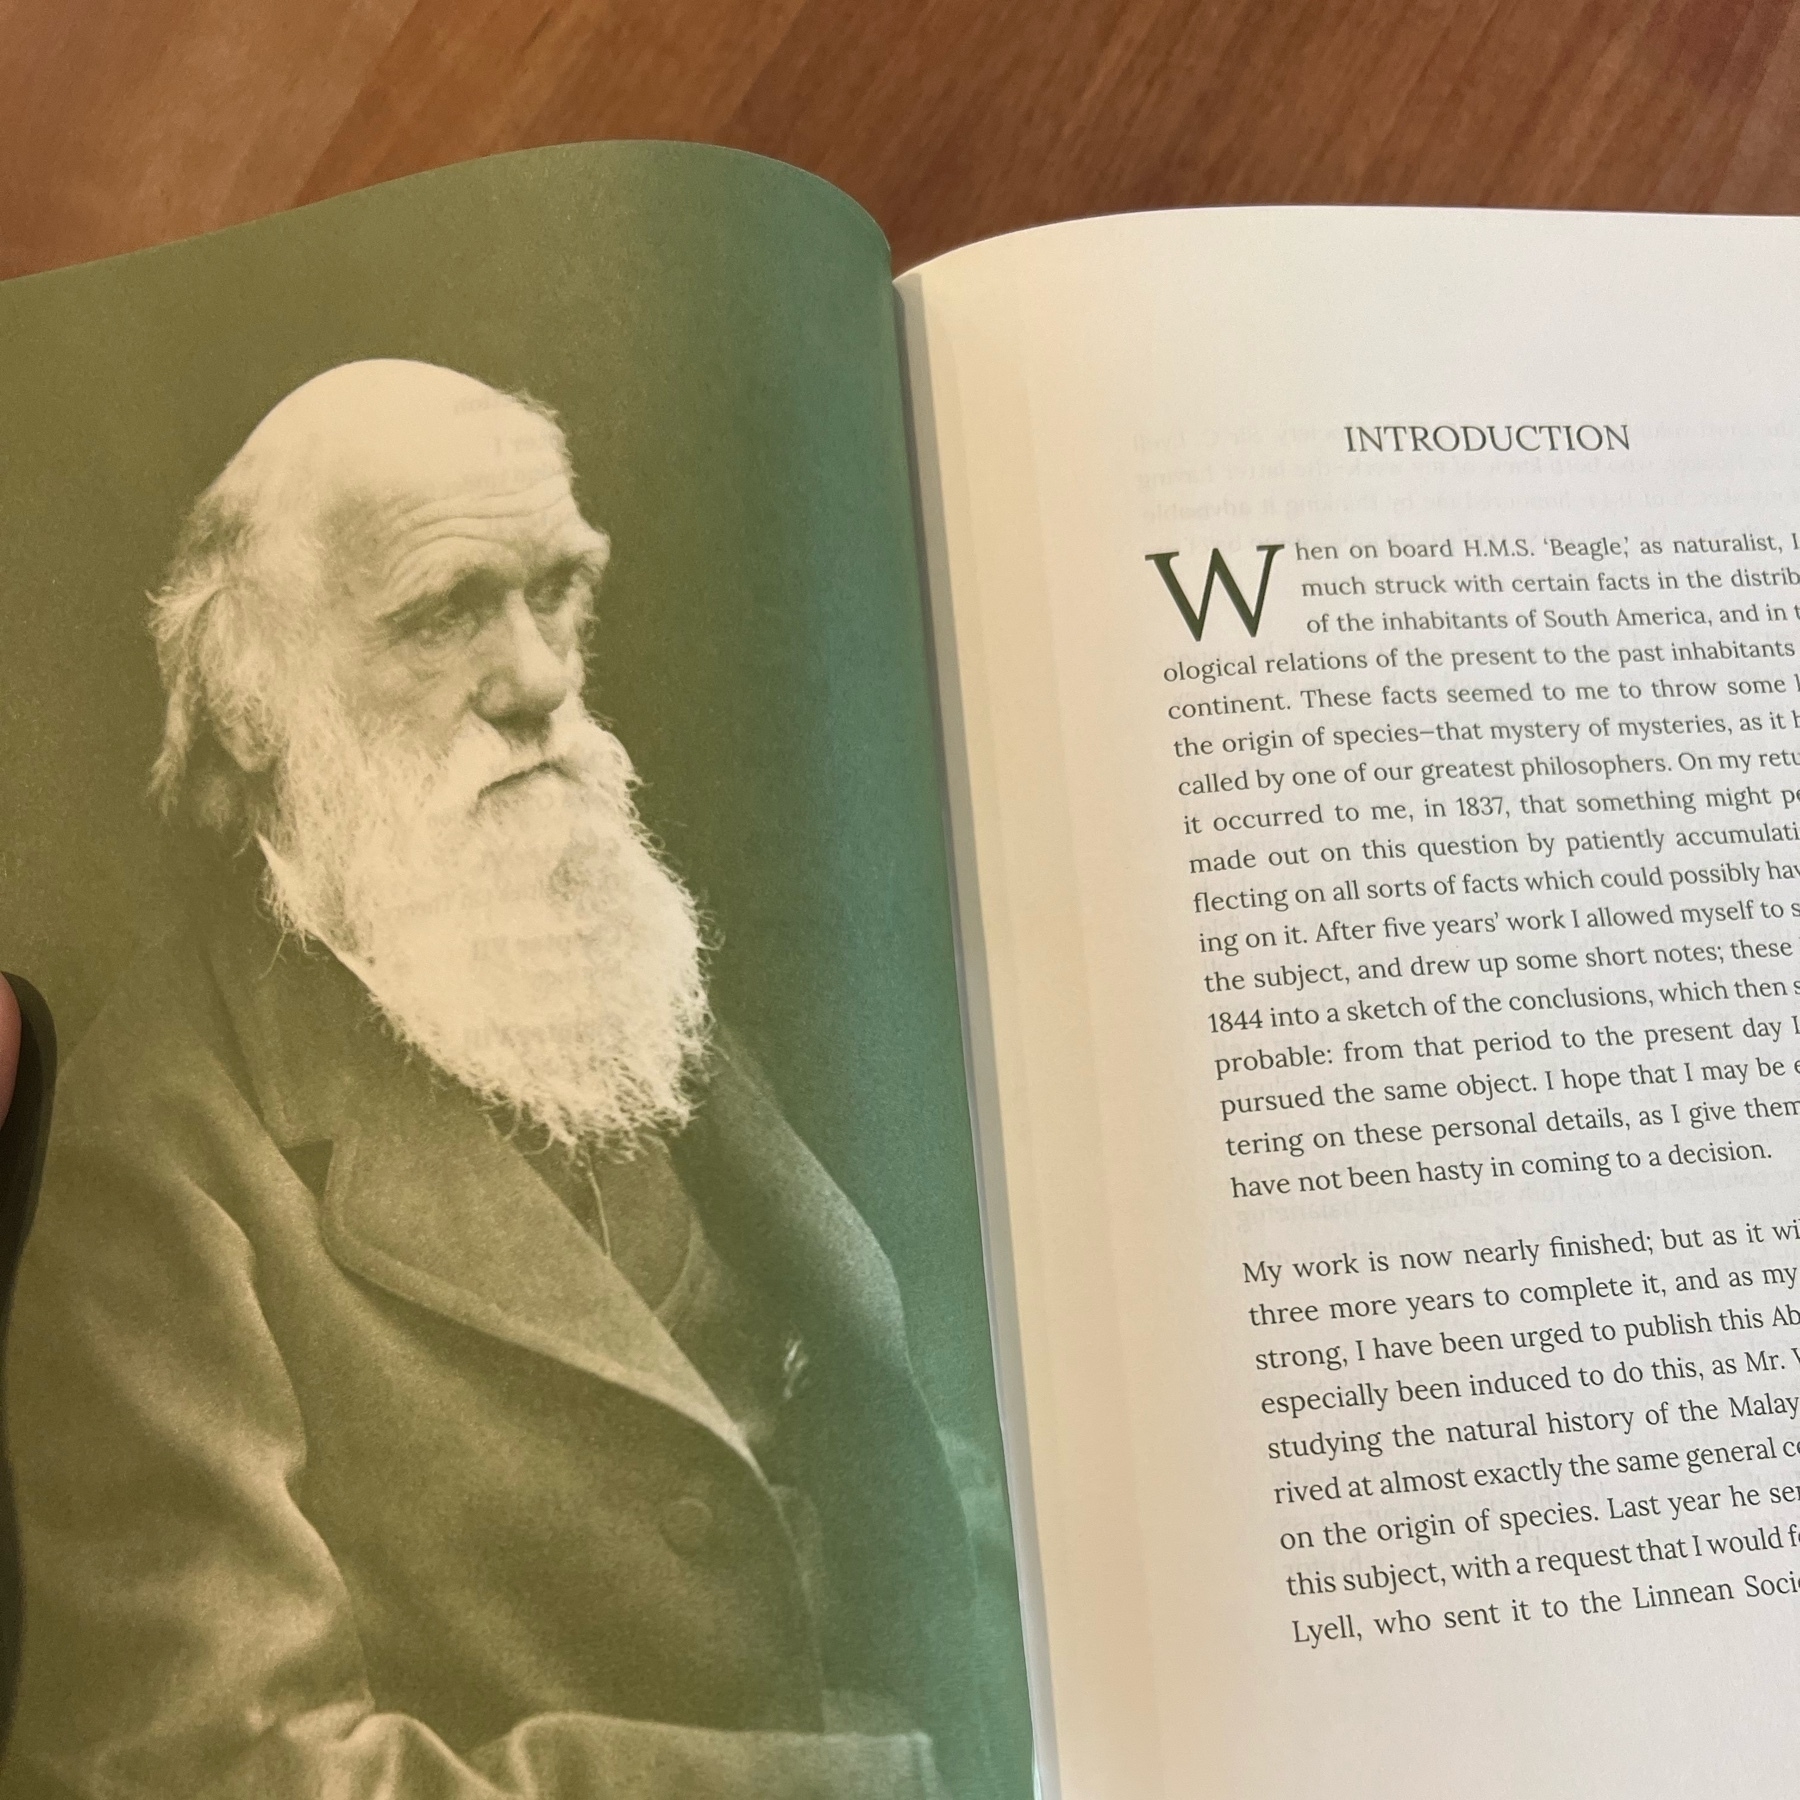 Introduction and picture of Charles Darwin